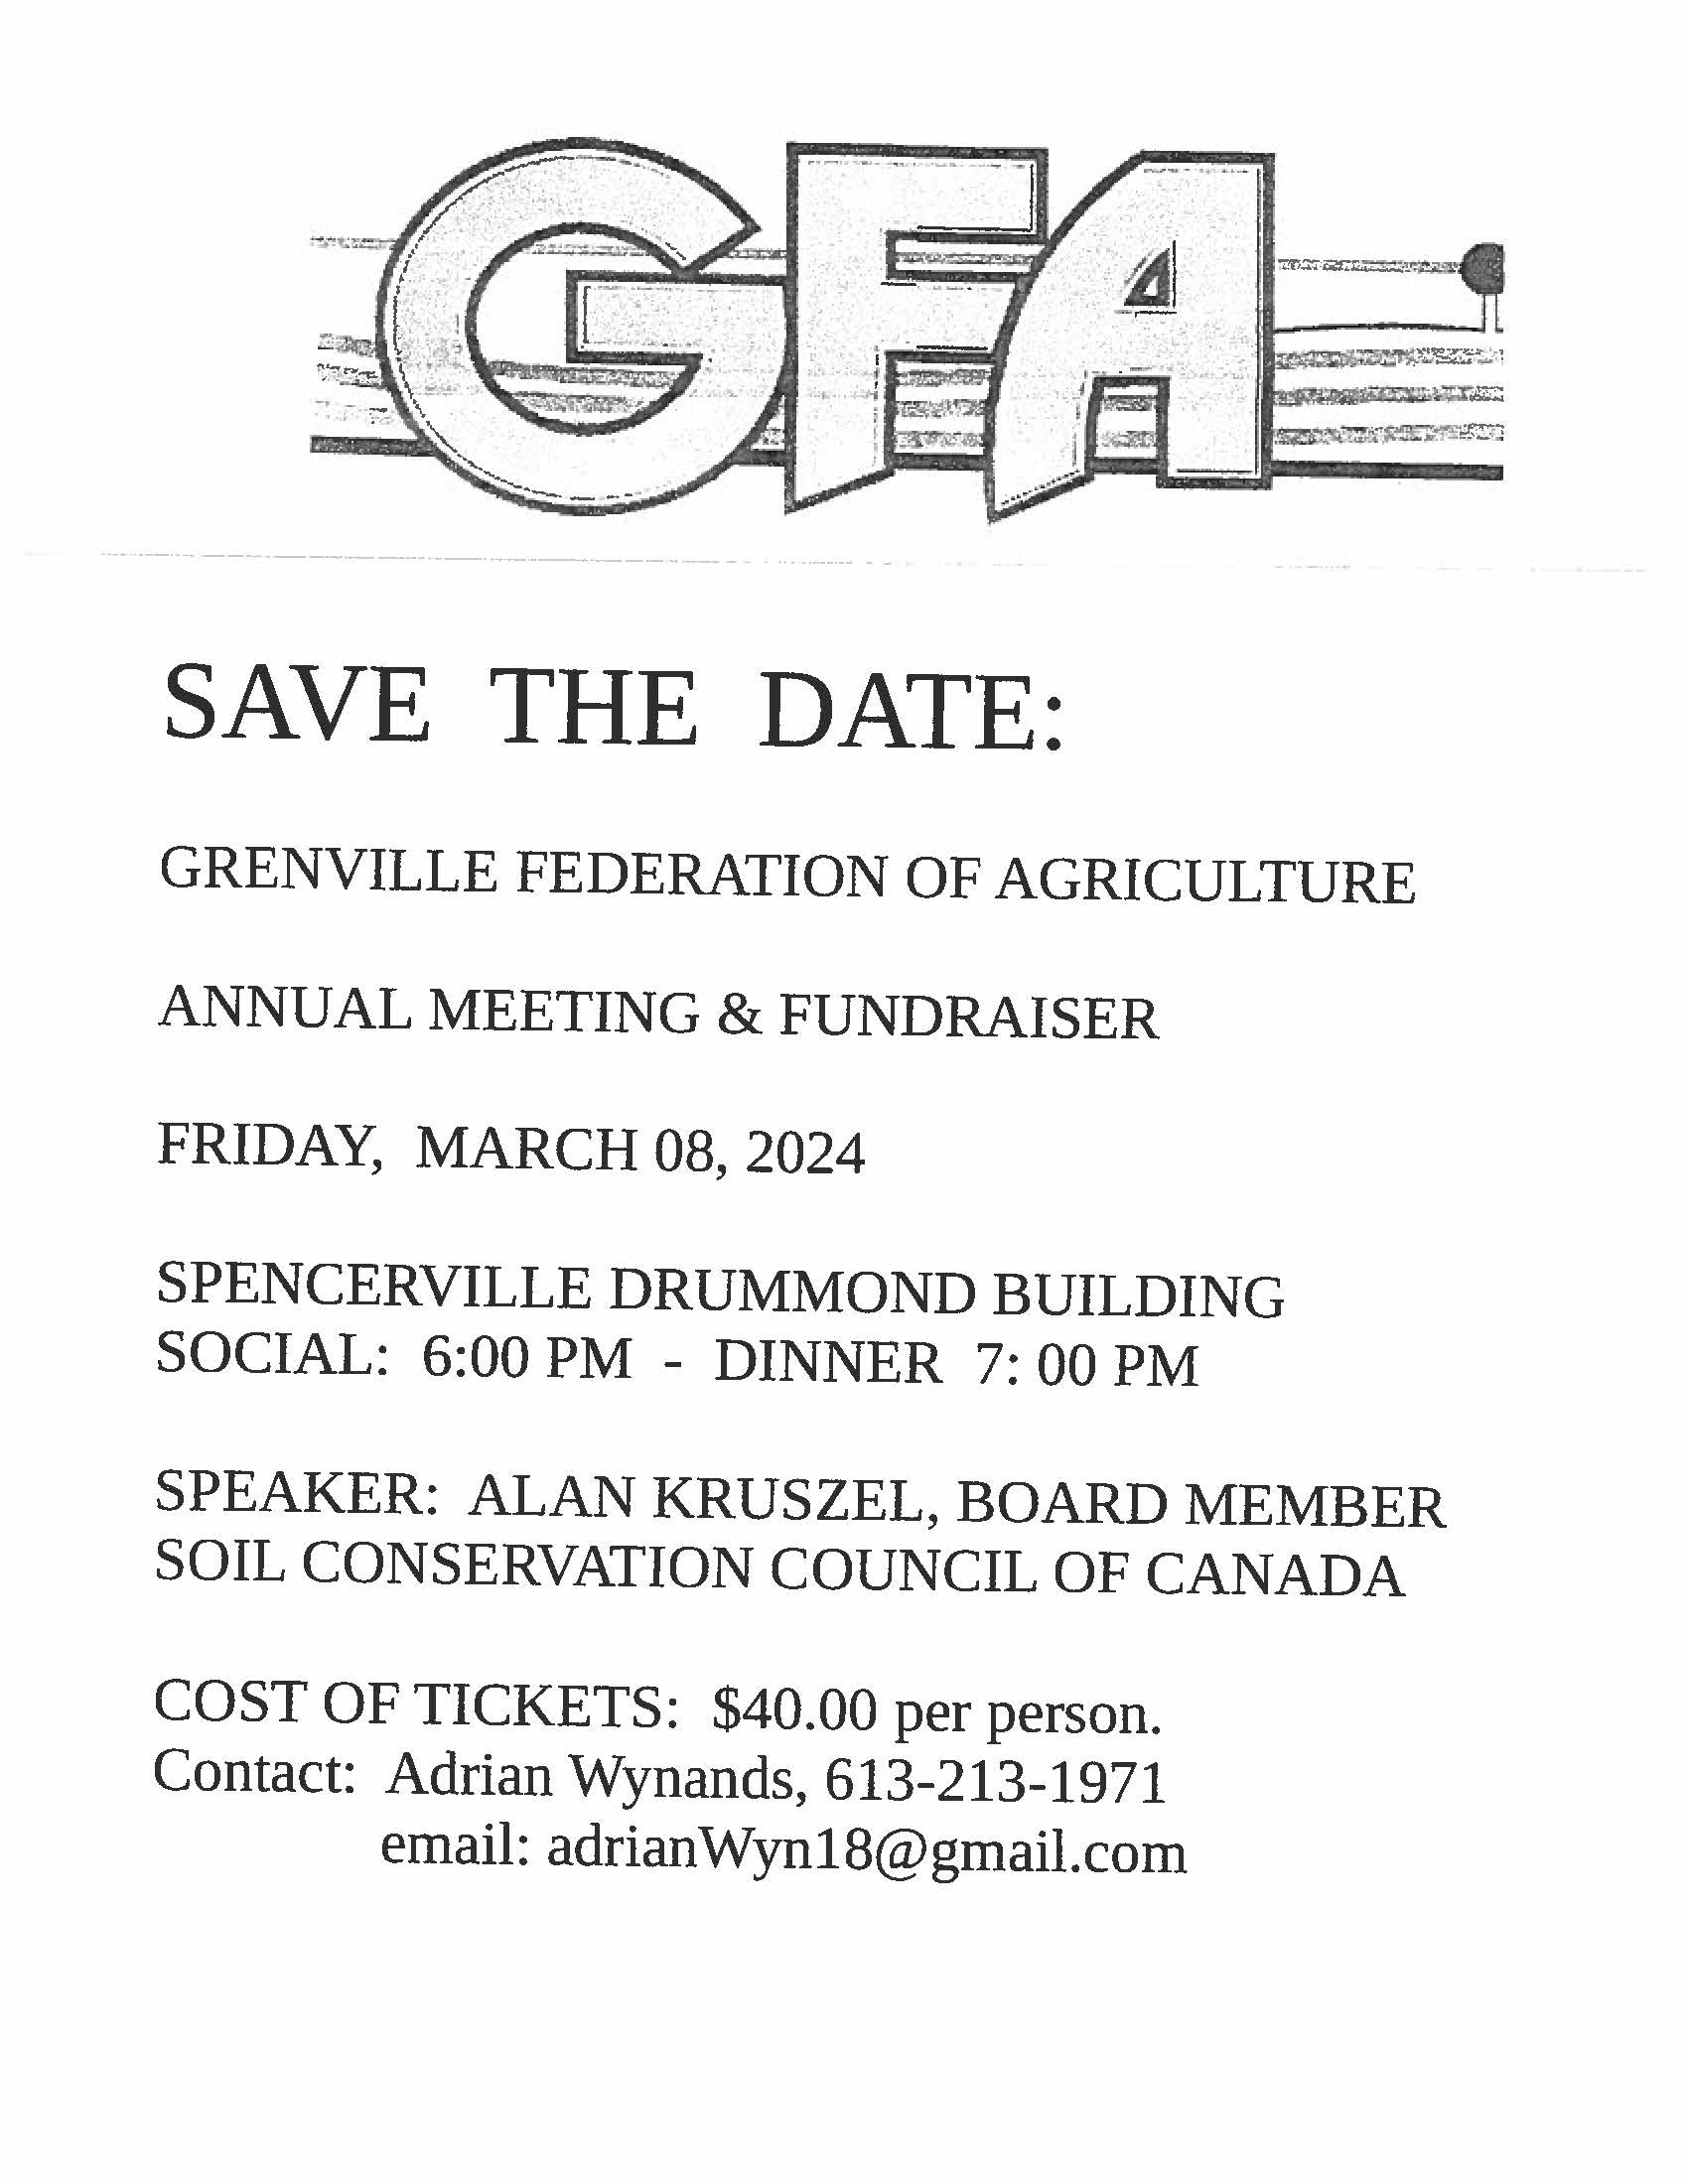 Grenville Federation of Agriculture Annual Meeting & Fundraiser @ Drummond Building | Spencerville | Ontario | Canada